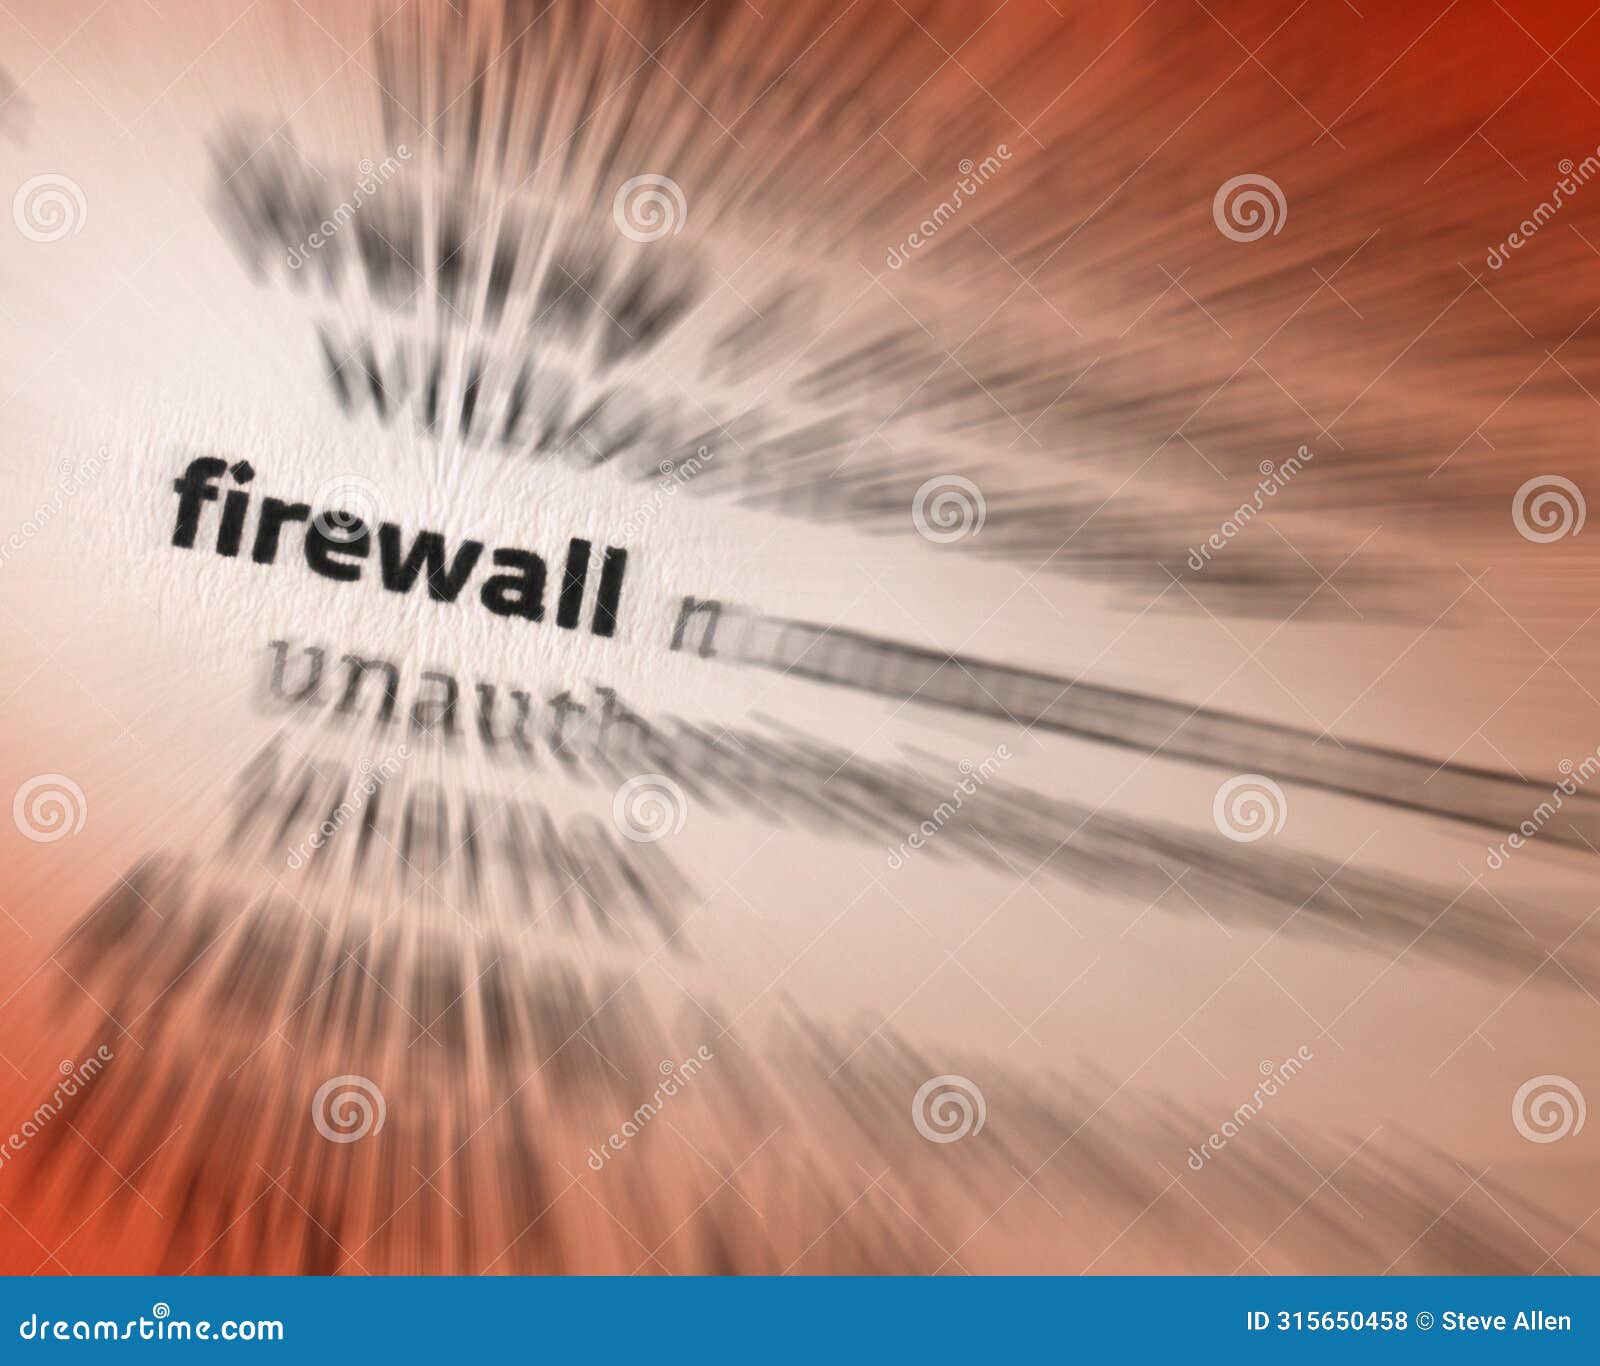 firewall - a wall or partition ed to inhibit fire or protect data